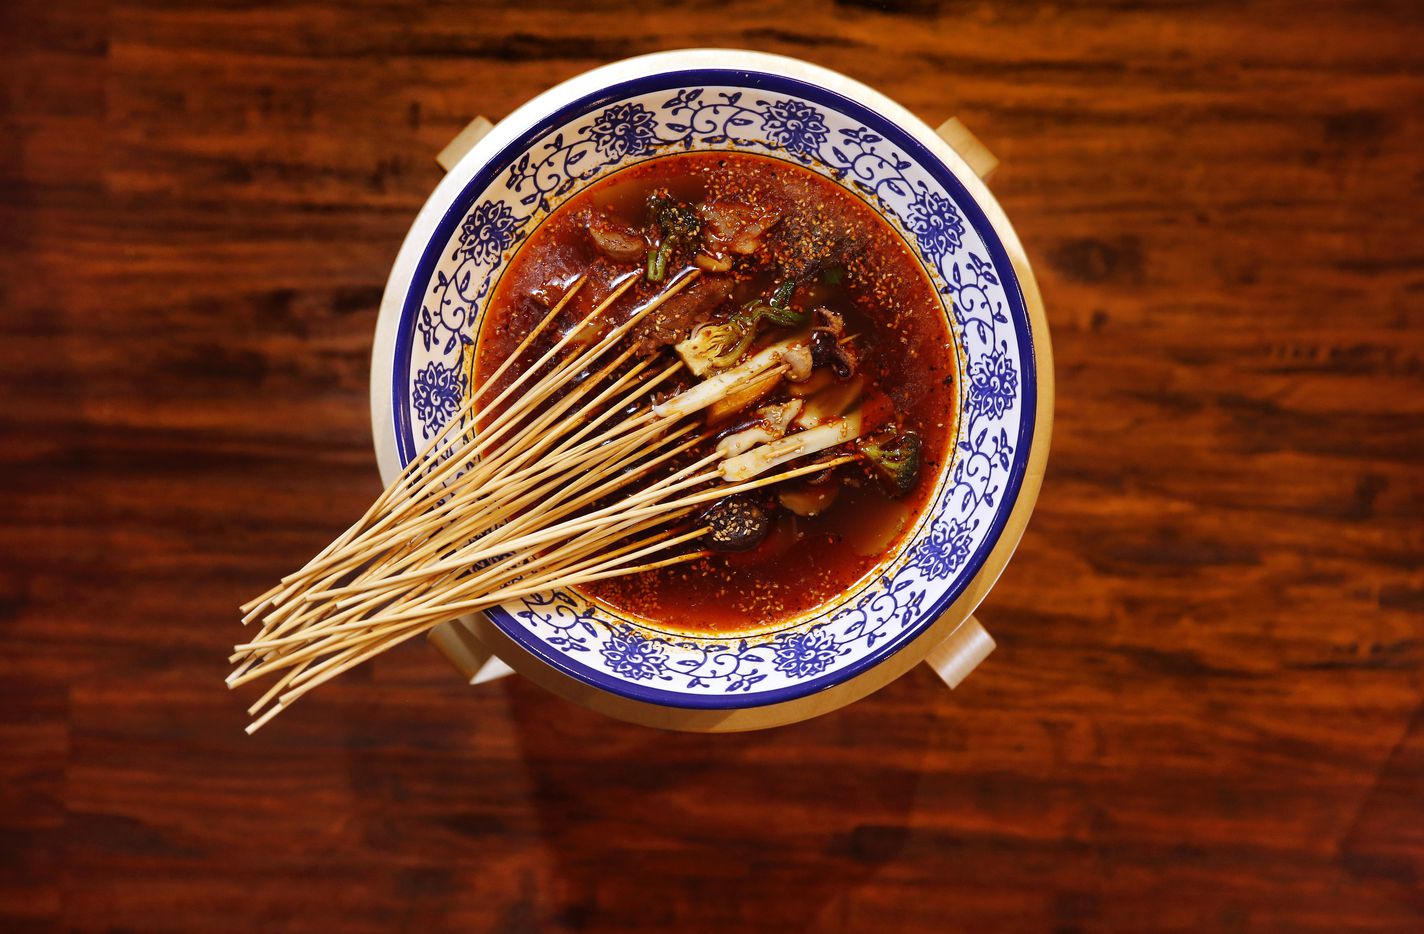 Skewered meats and seafood are served in a large bowl of spicy chicken broth with Sichuan pepper at Chuan Chuan Boiled Skewer Restaurant in Plano.  (Tom Fox/Staff Photographer)